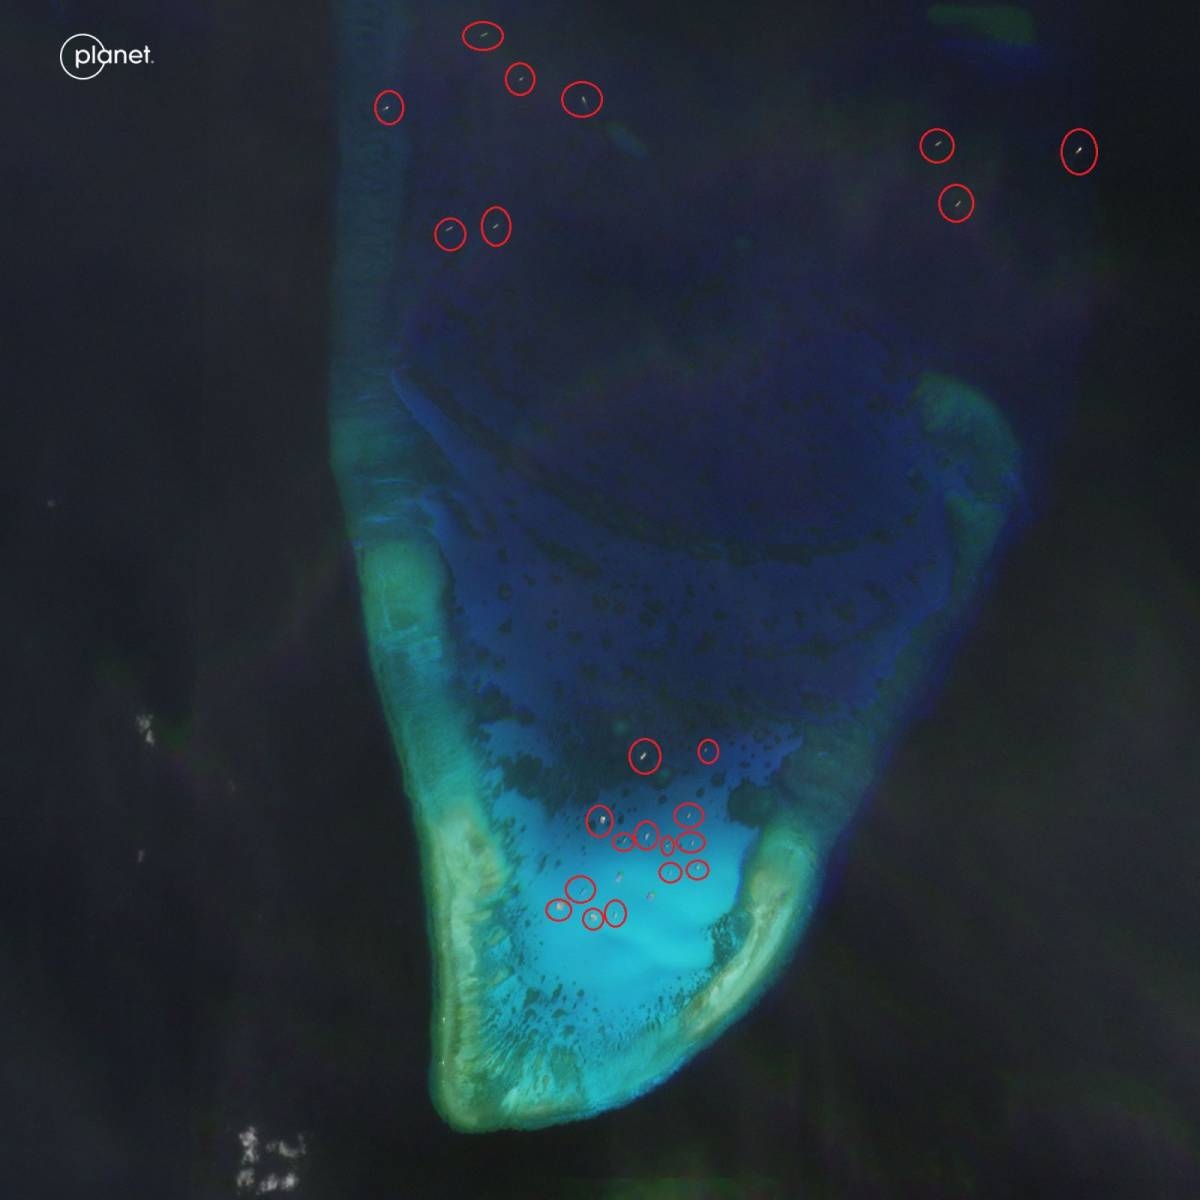 35 Chinese ships remain at 'harvested' WPS reef, according to satellite image